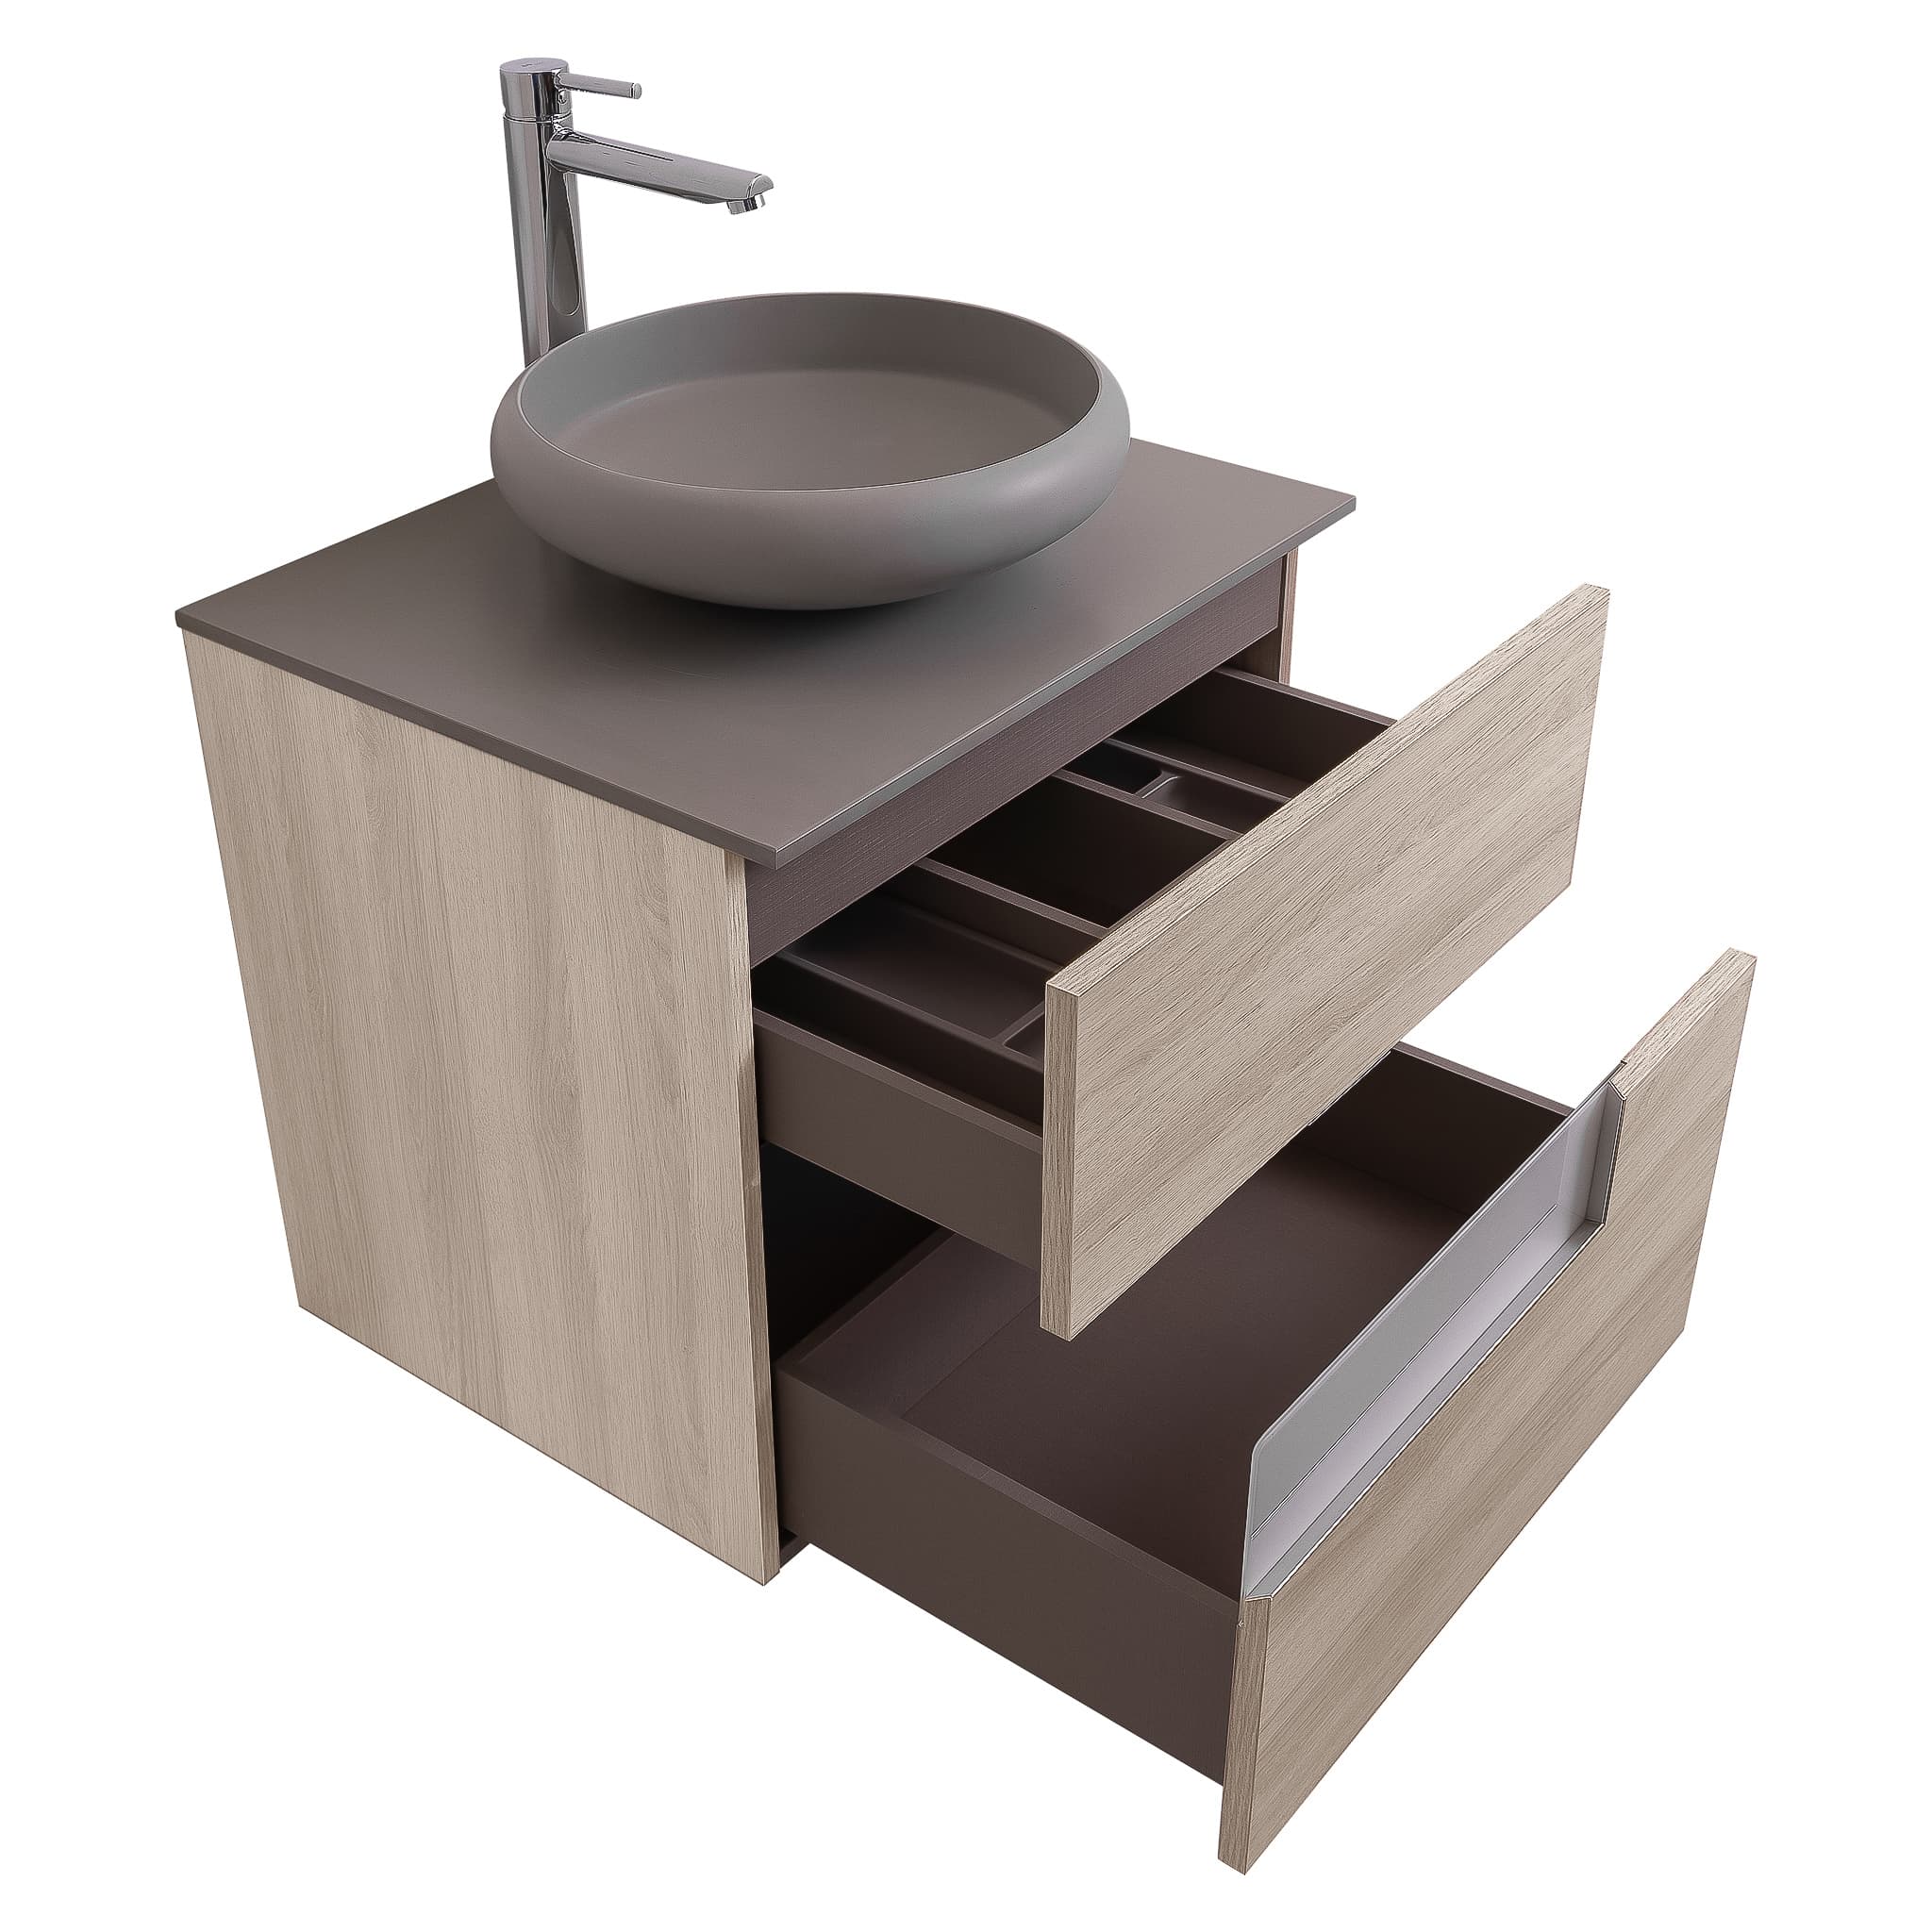 Vision 23.5 Natural Light Wood Cabinet, Solid Surface Flat Grey Counter And Round Solid Surface Grey Basin 1153, Wall Mounted Modern Vanity Set